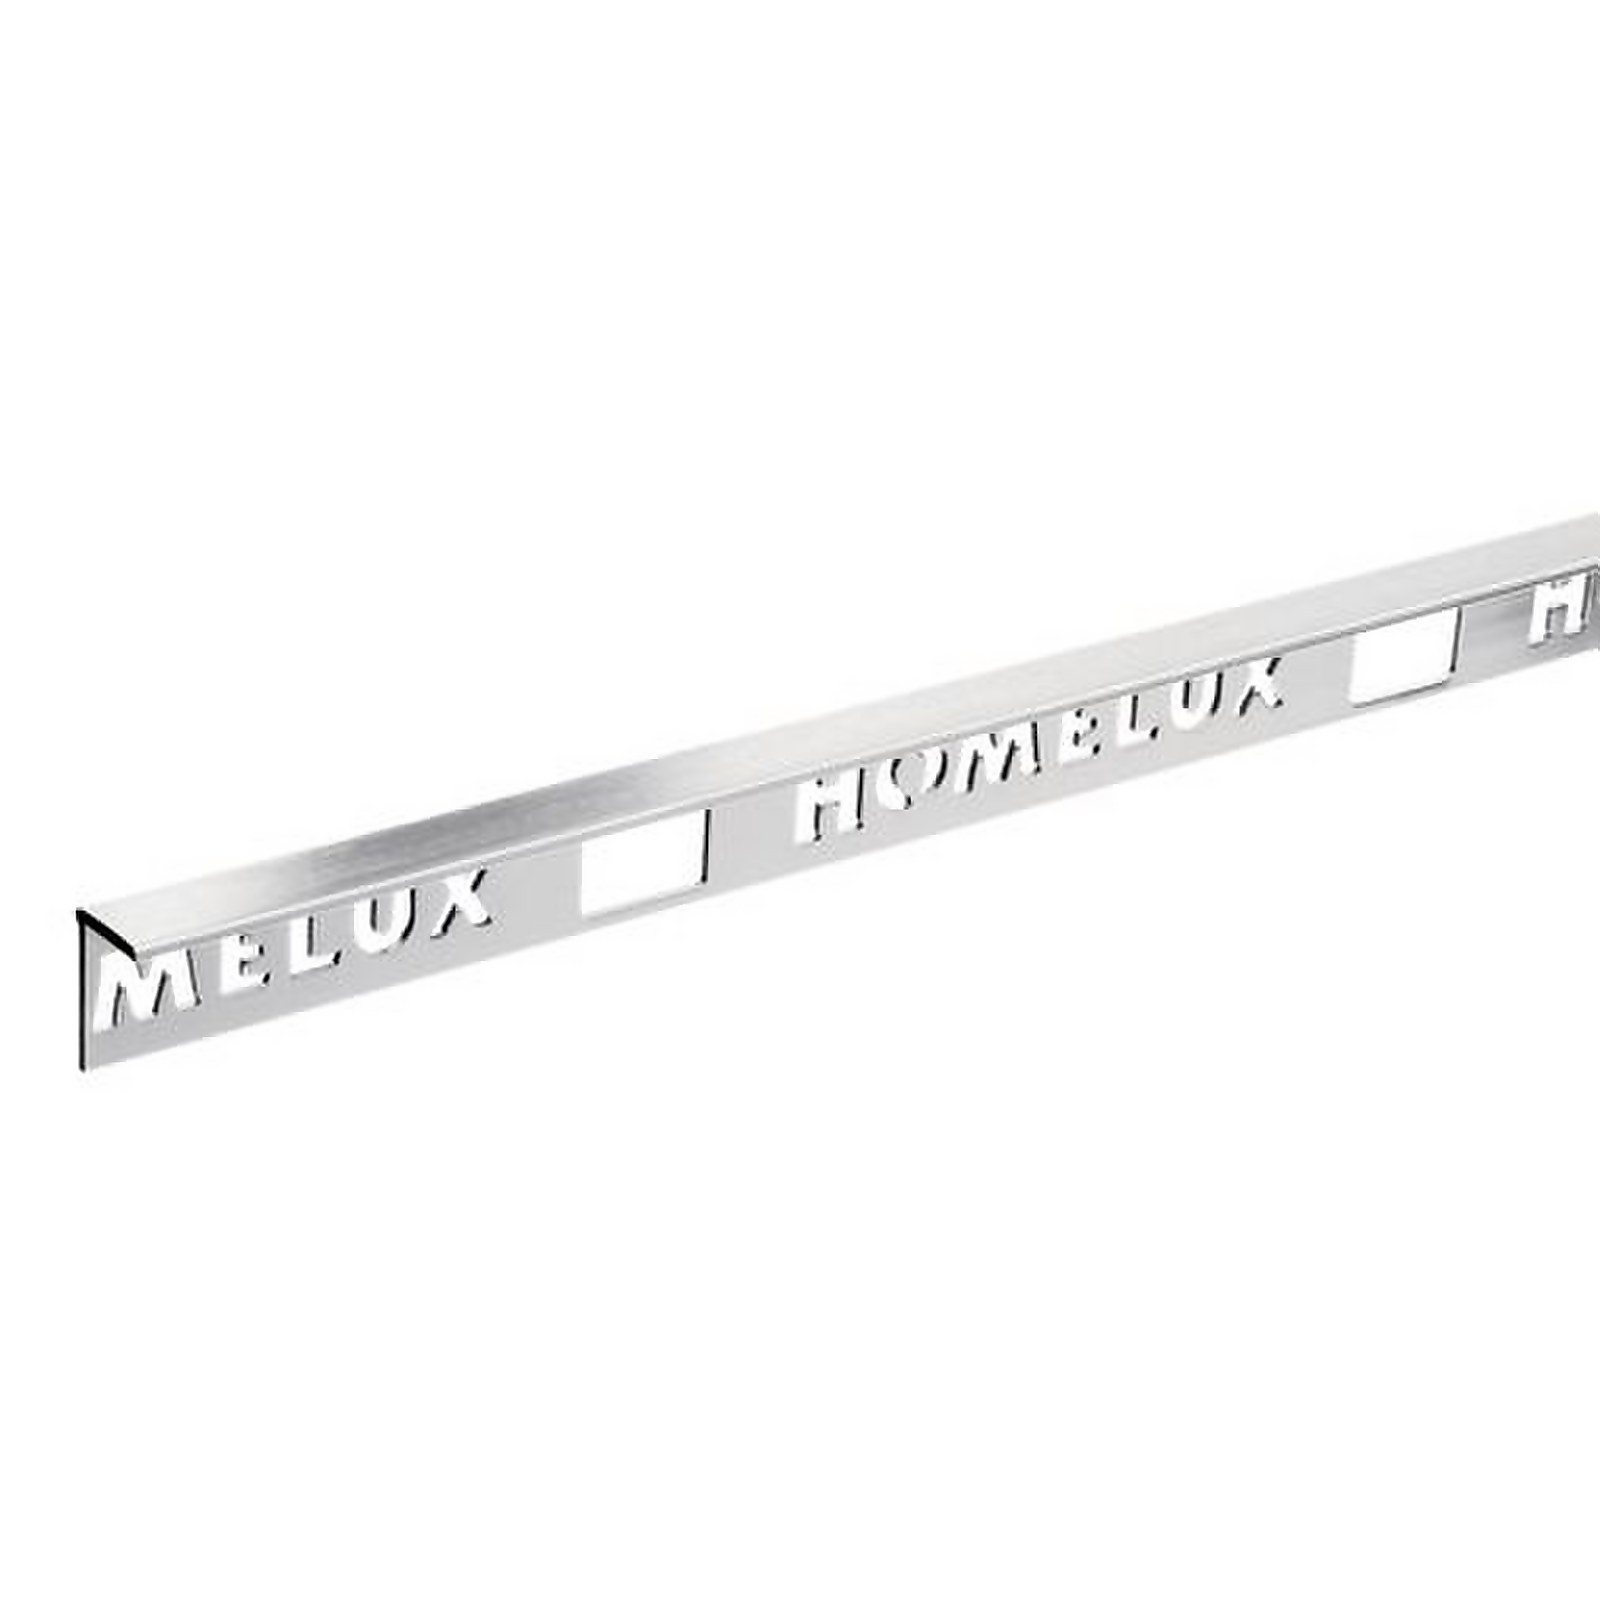 Photo of Homelux 8mm Straight Edge Tile Trim - Stainless Steel Effect - 1.83m